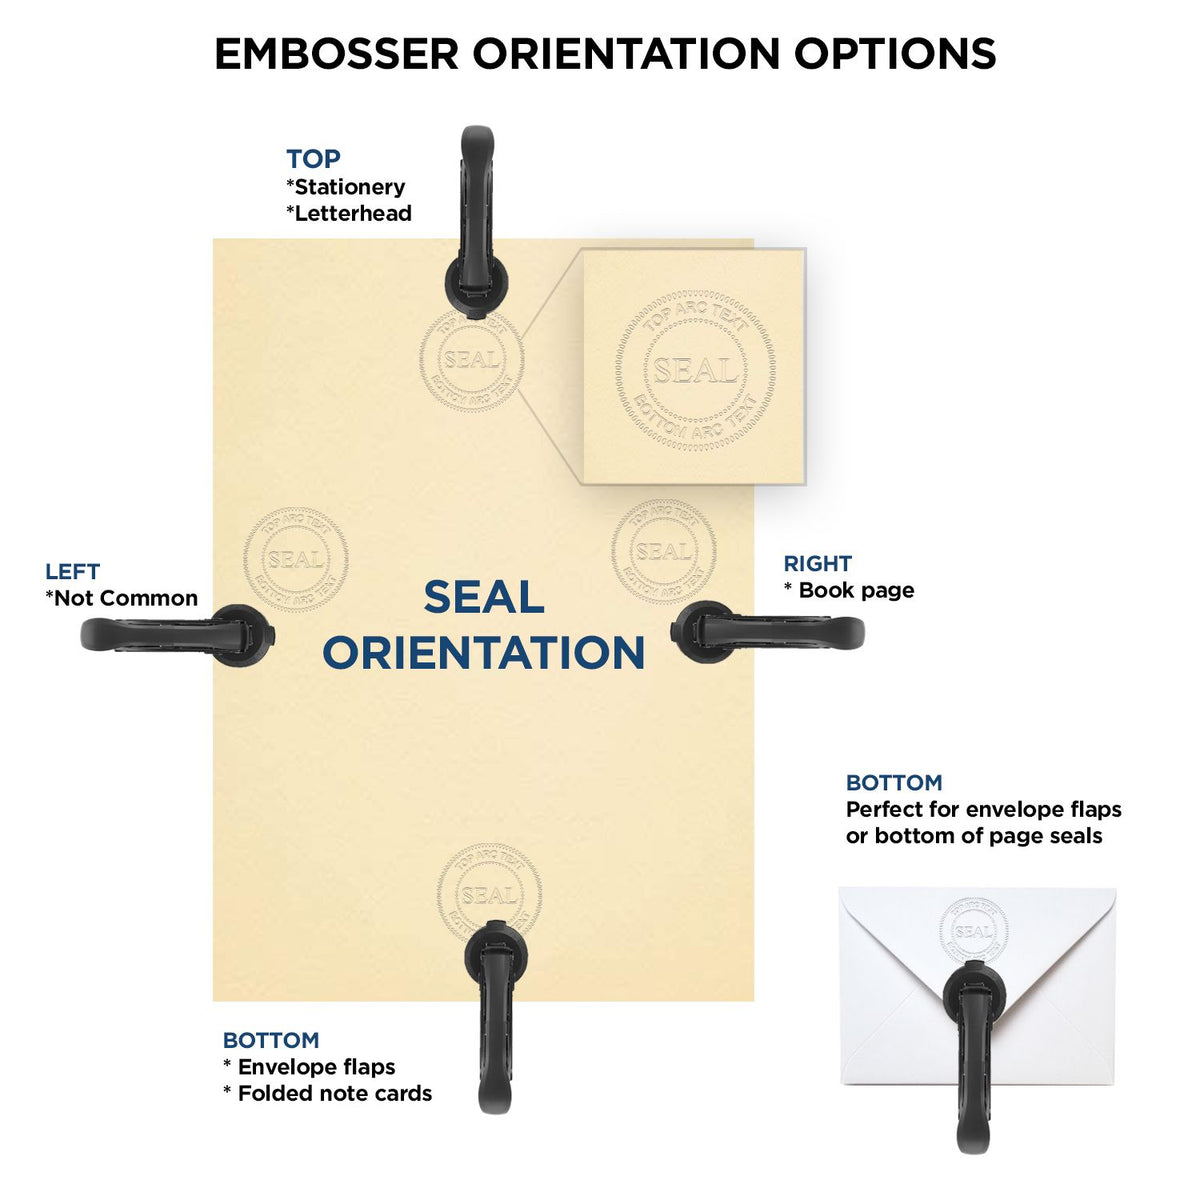 An infographic for the Handheld New York Professional Geologist Embosser showing embosser orientation, this is showing examples of a top, bottom, right and left insert.